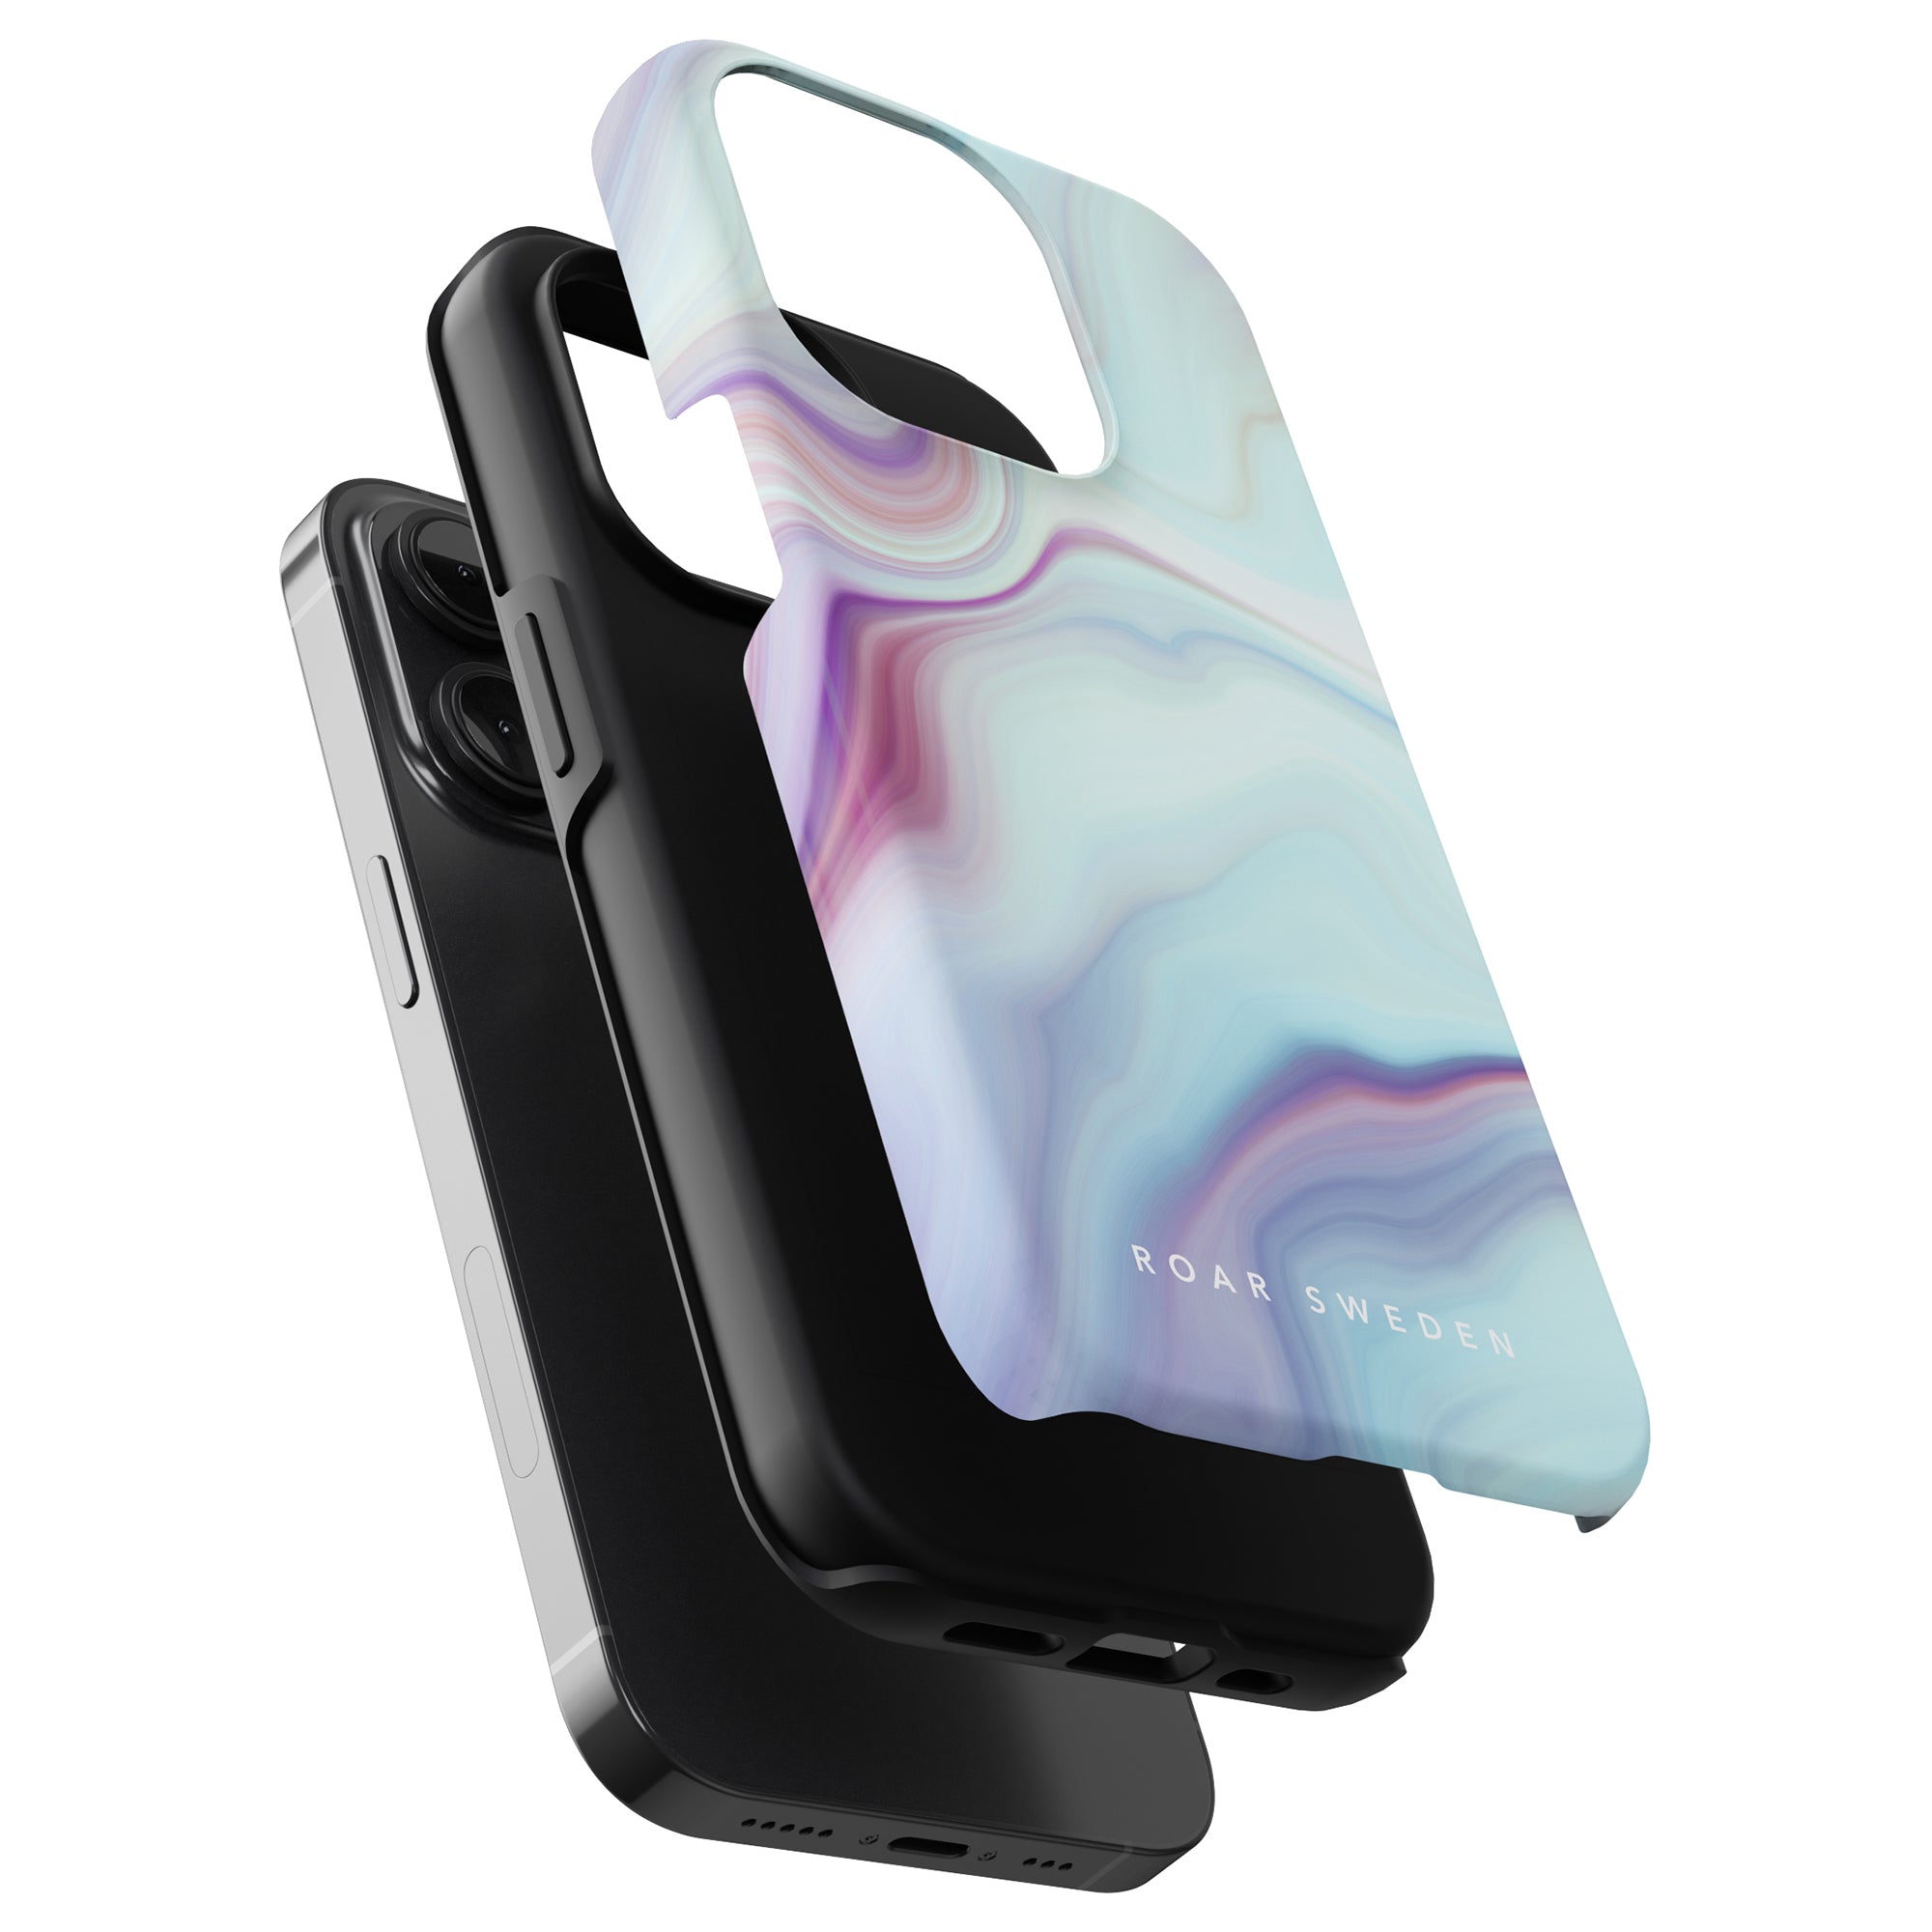 A smartphone with a black case next to an Abalone - Tough Case from the Oyster Collection with the text "roar sweden" on it.